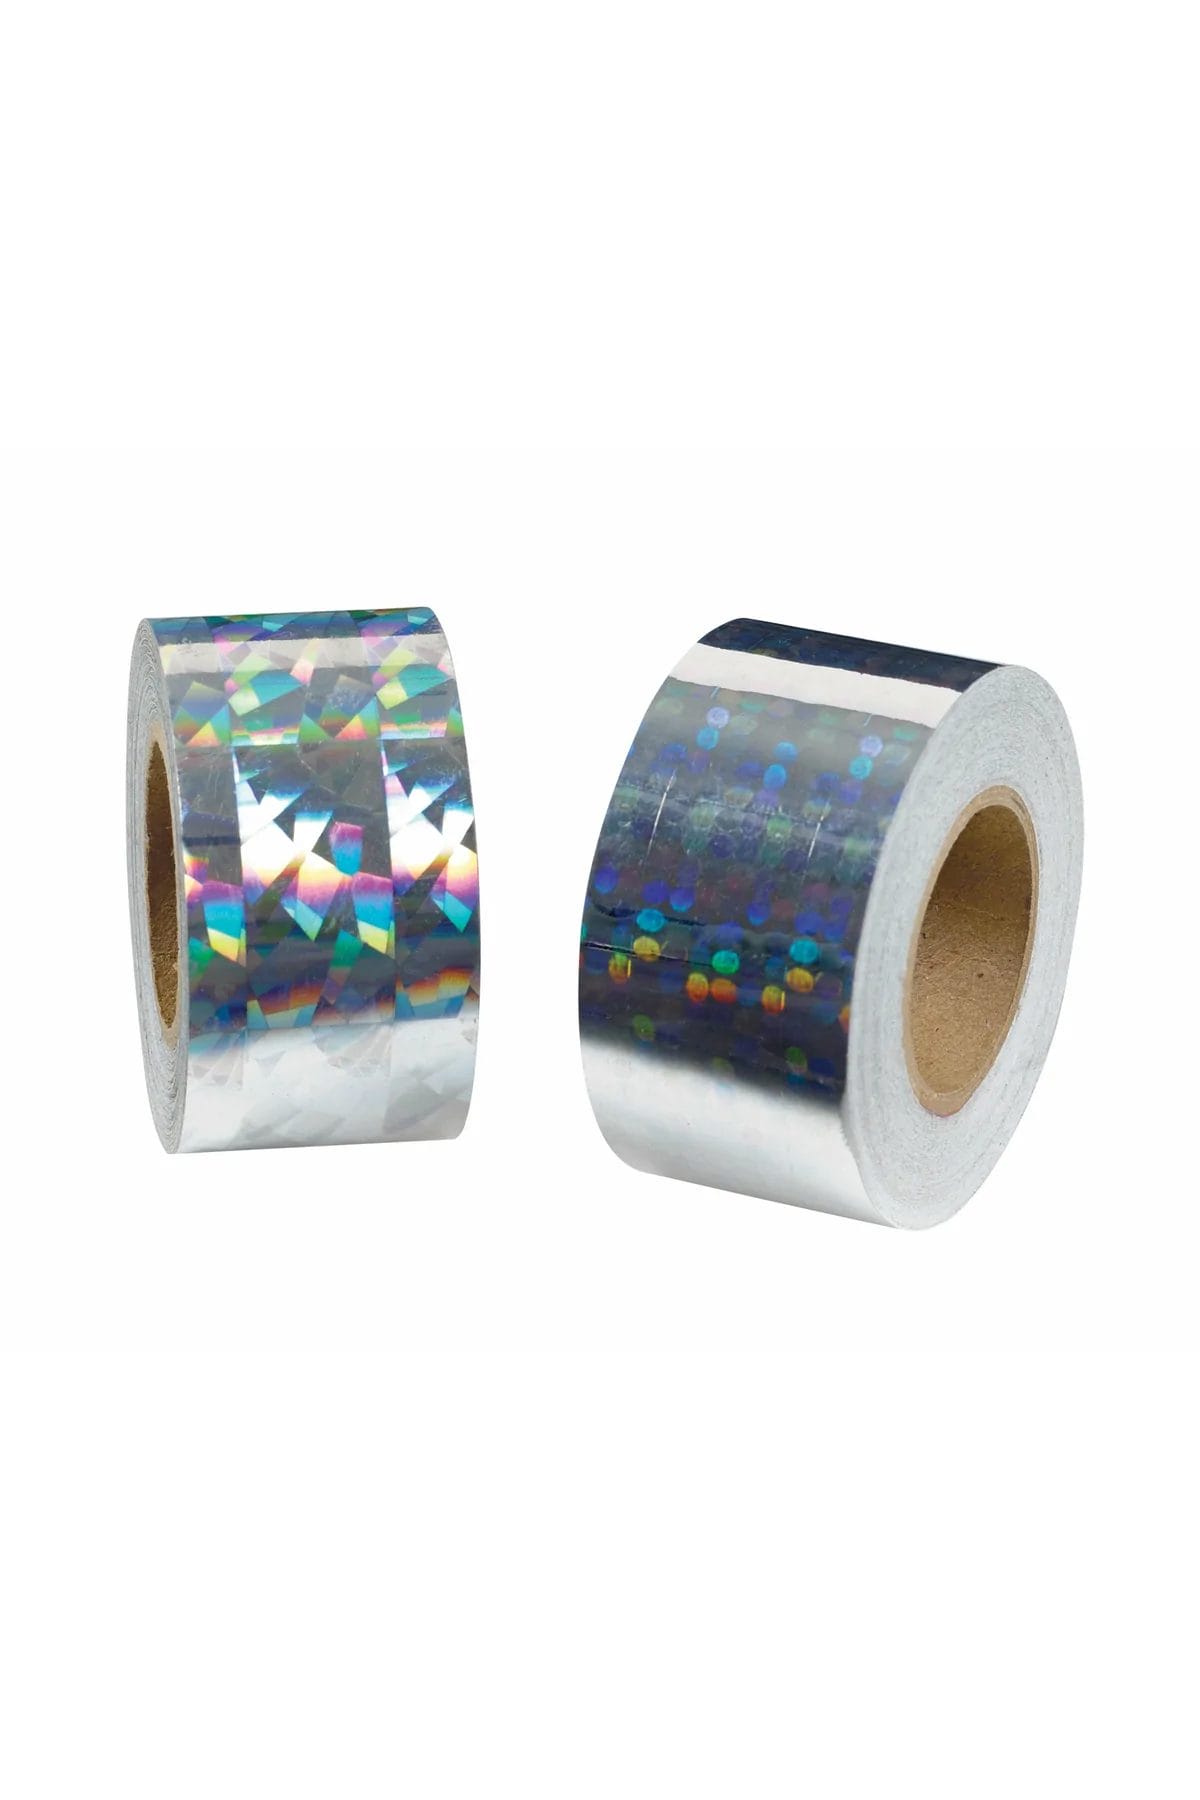 HoloCrystal Tape, choose your color and size, 50 foot rolls of Holographic  Tape